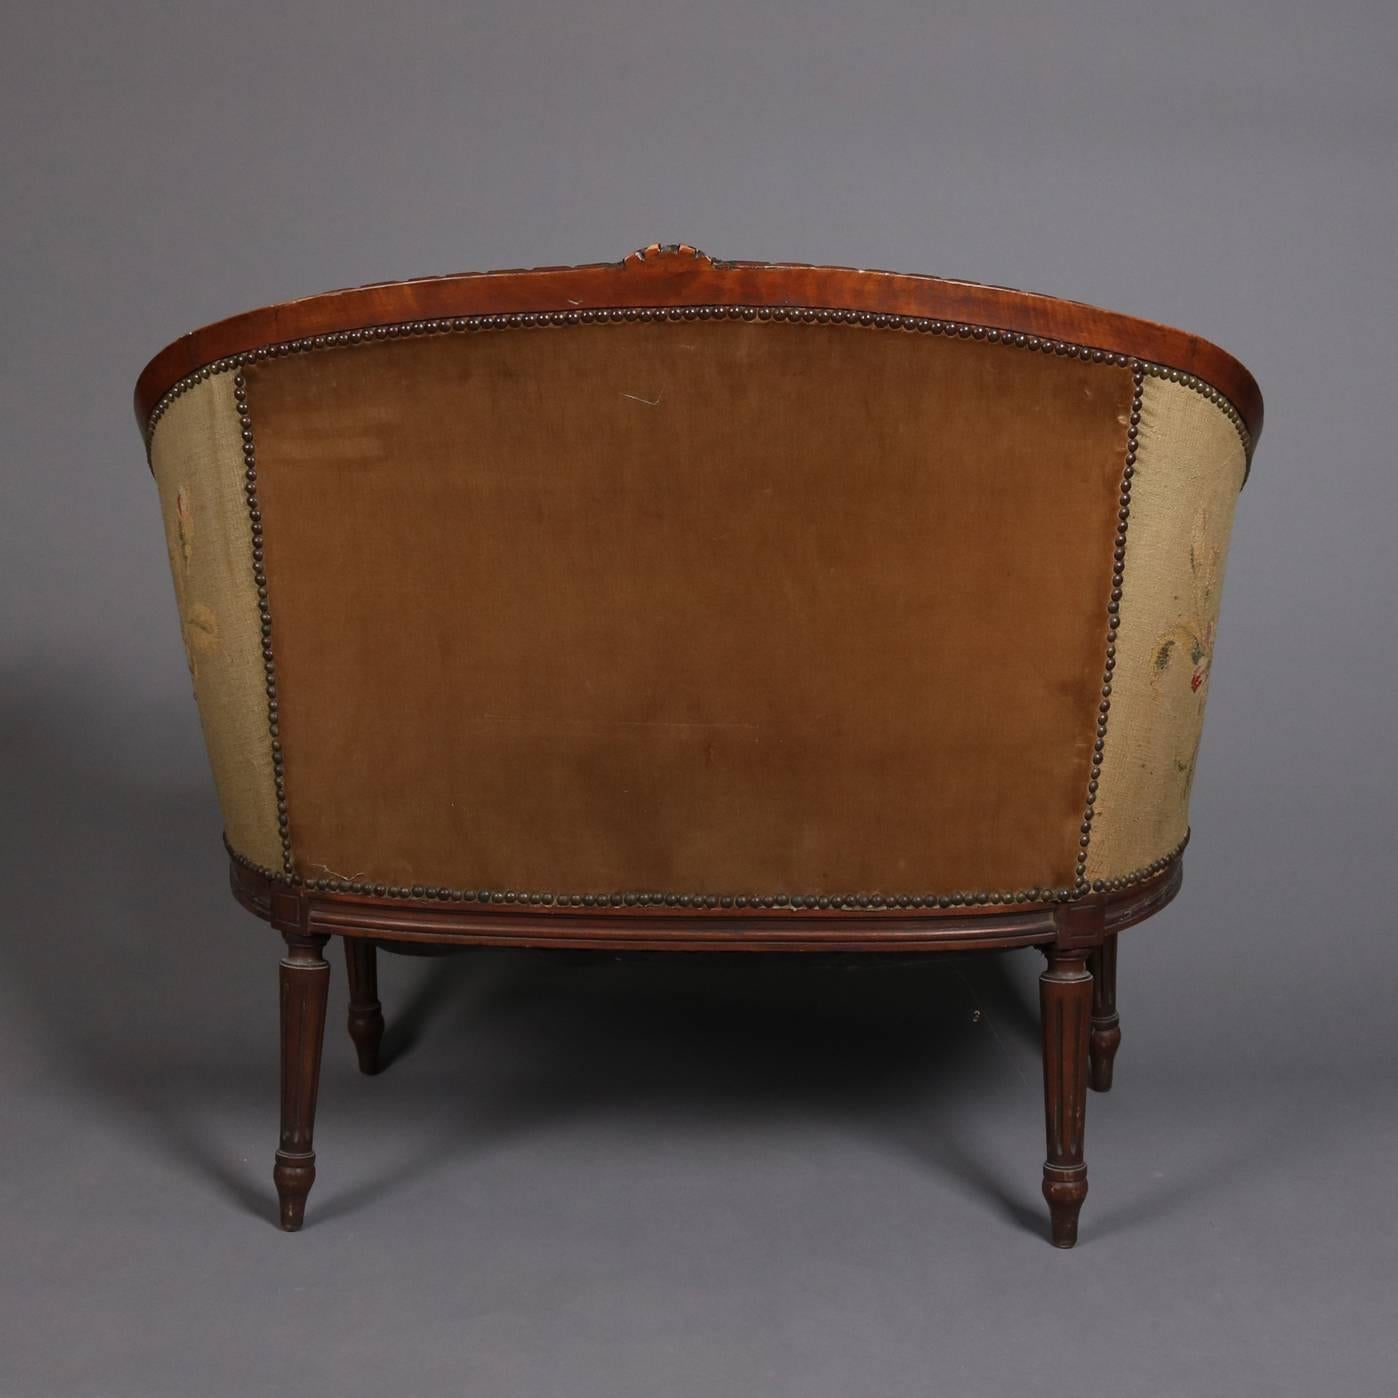 French Louis XVI Style Mahogany and Needlepoint Upholstery Settee, 19th Century 5